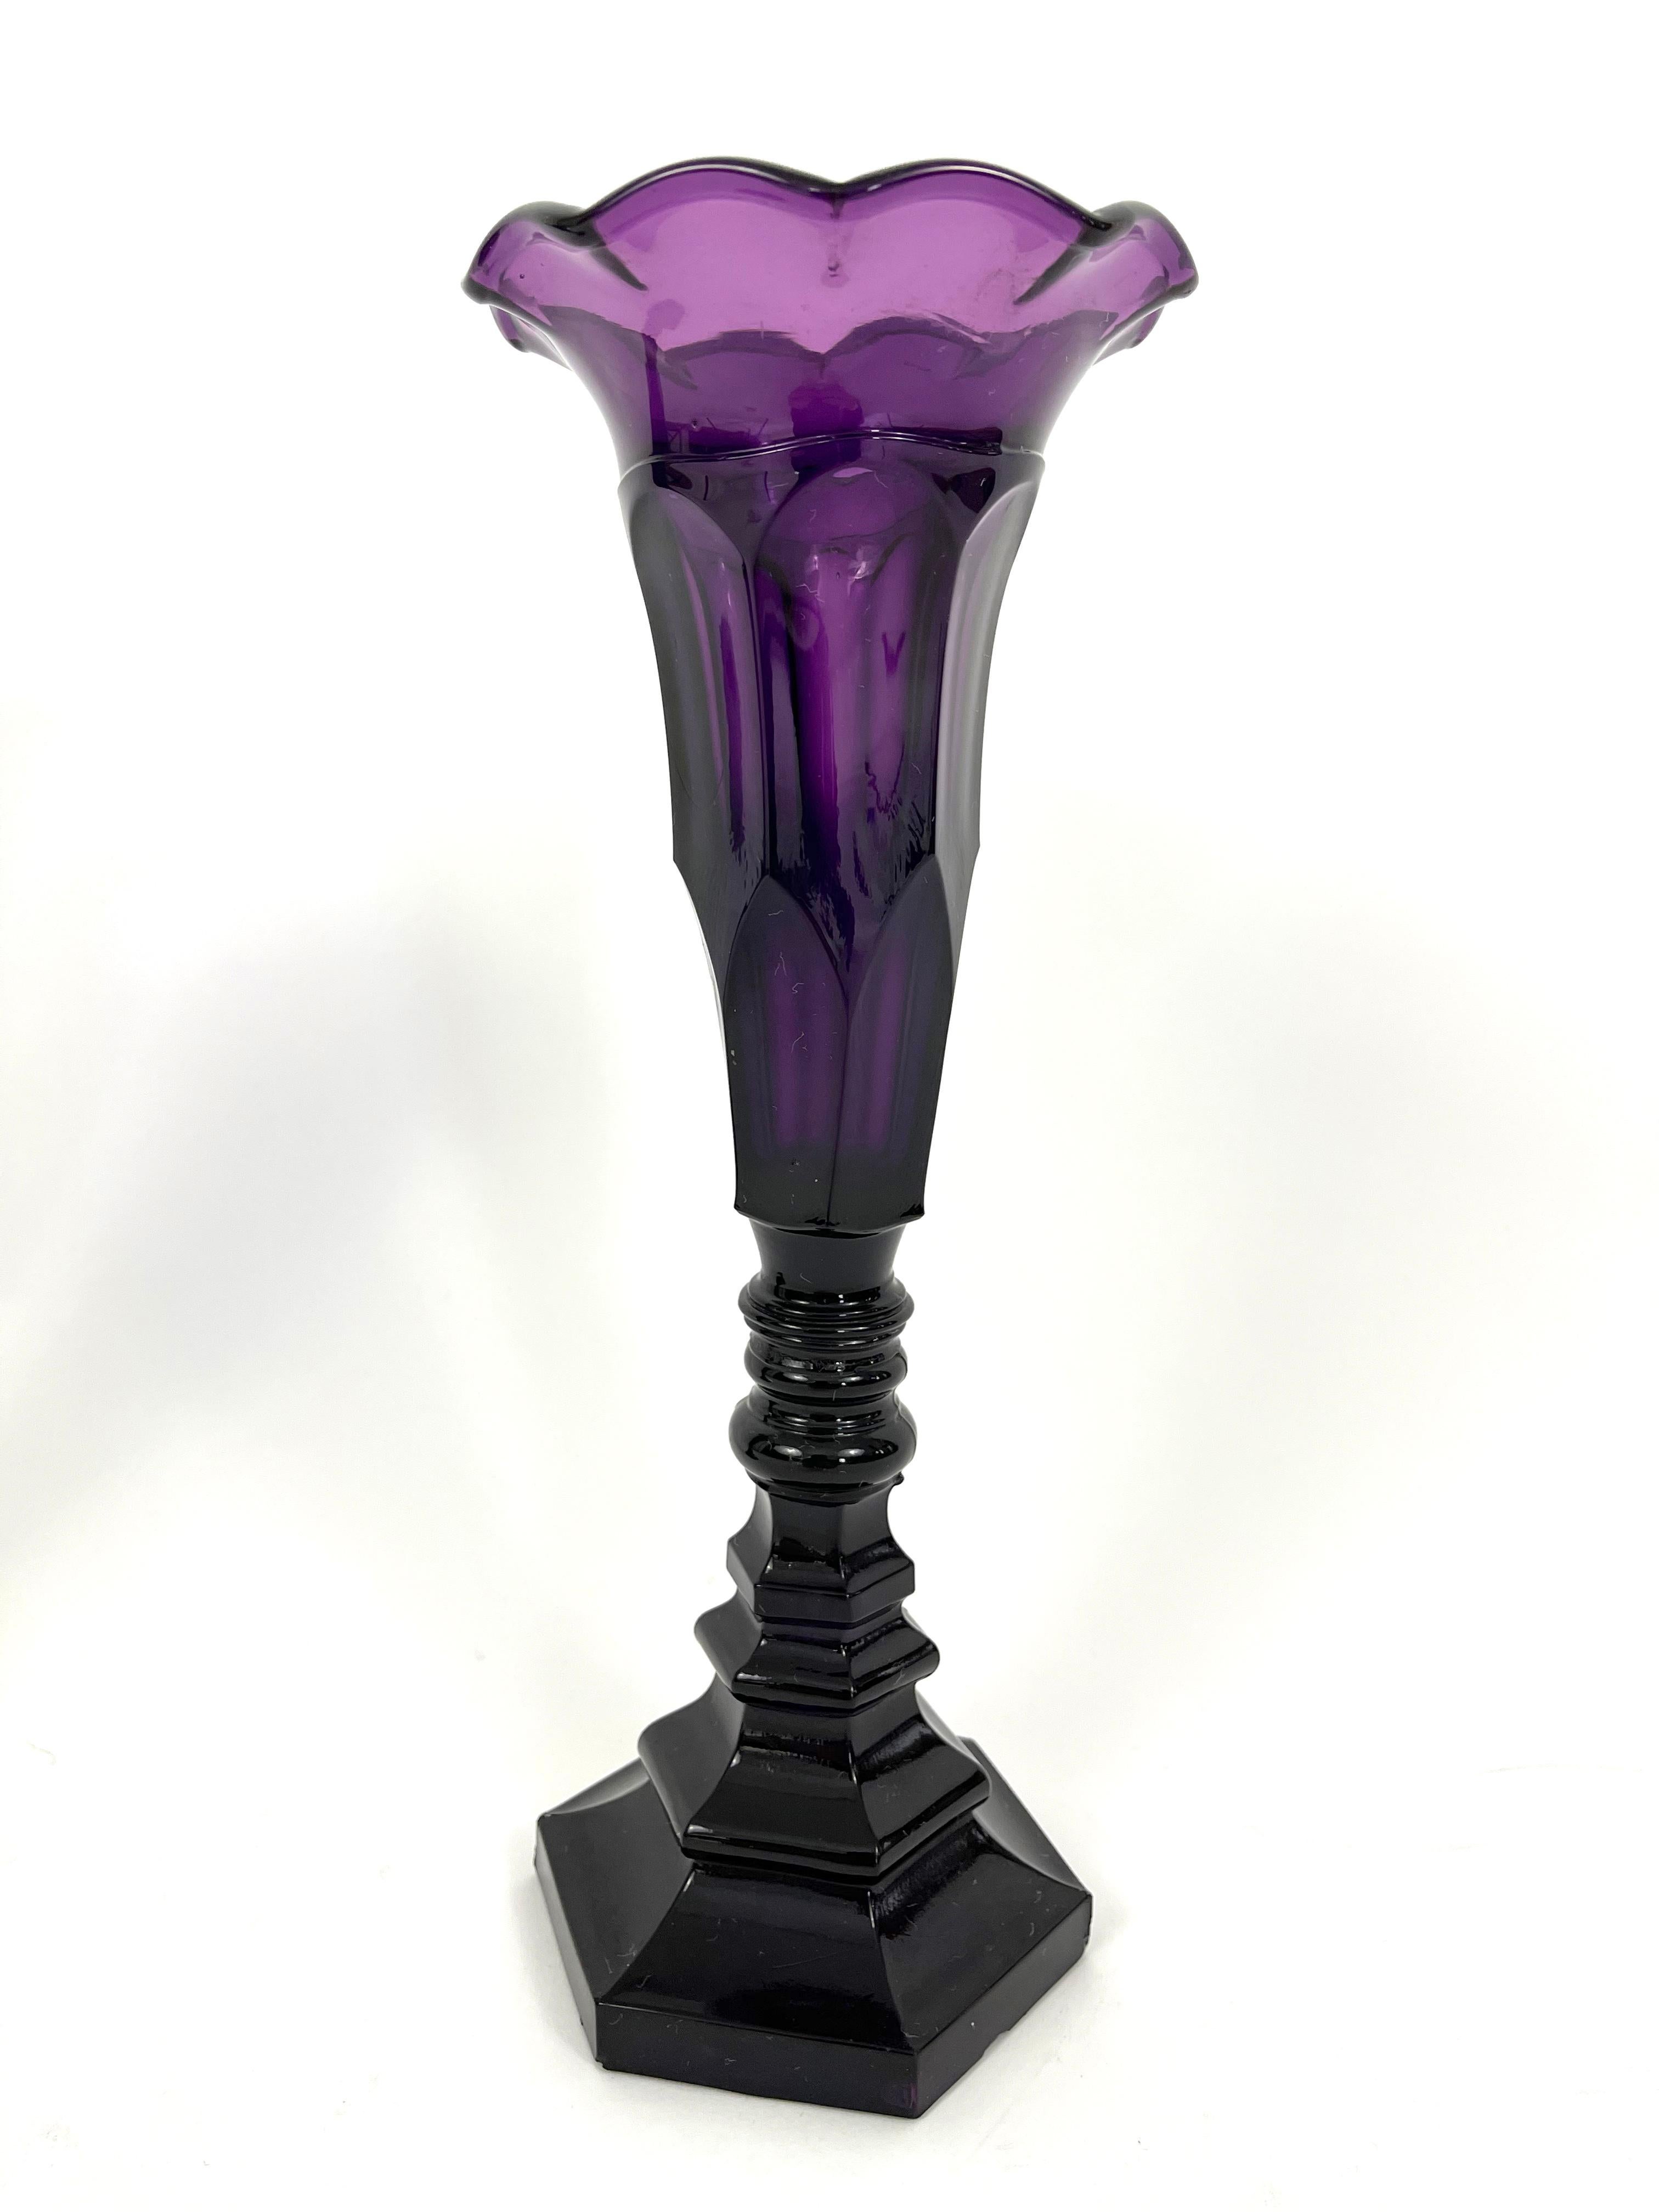 American Classical Pair of Tall 19th Century American Sandwich Amethyst Glass Vases